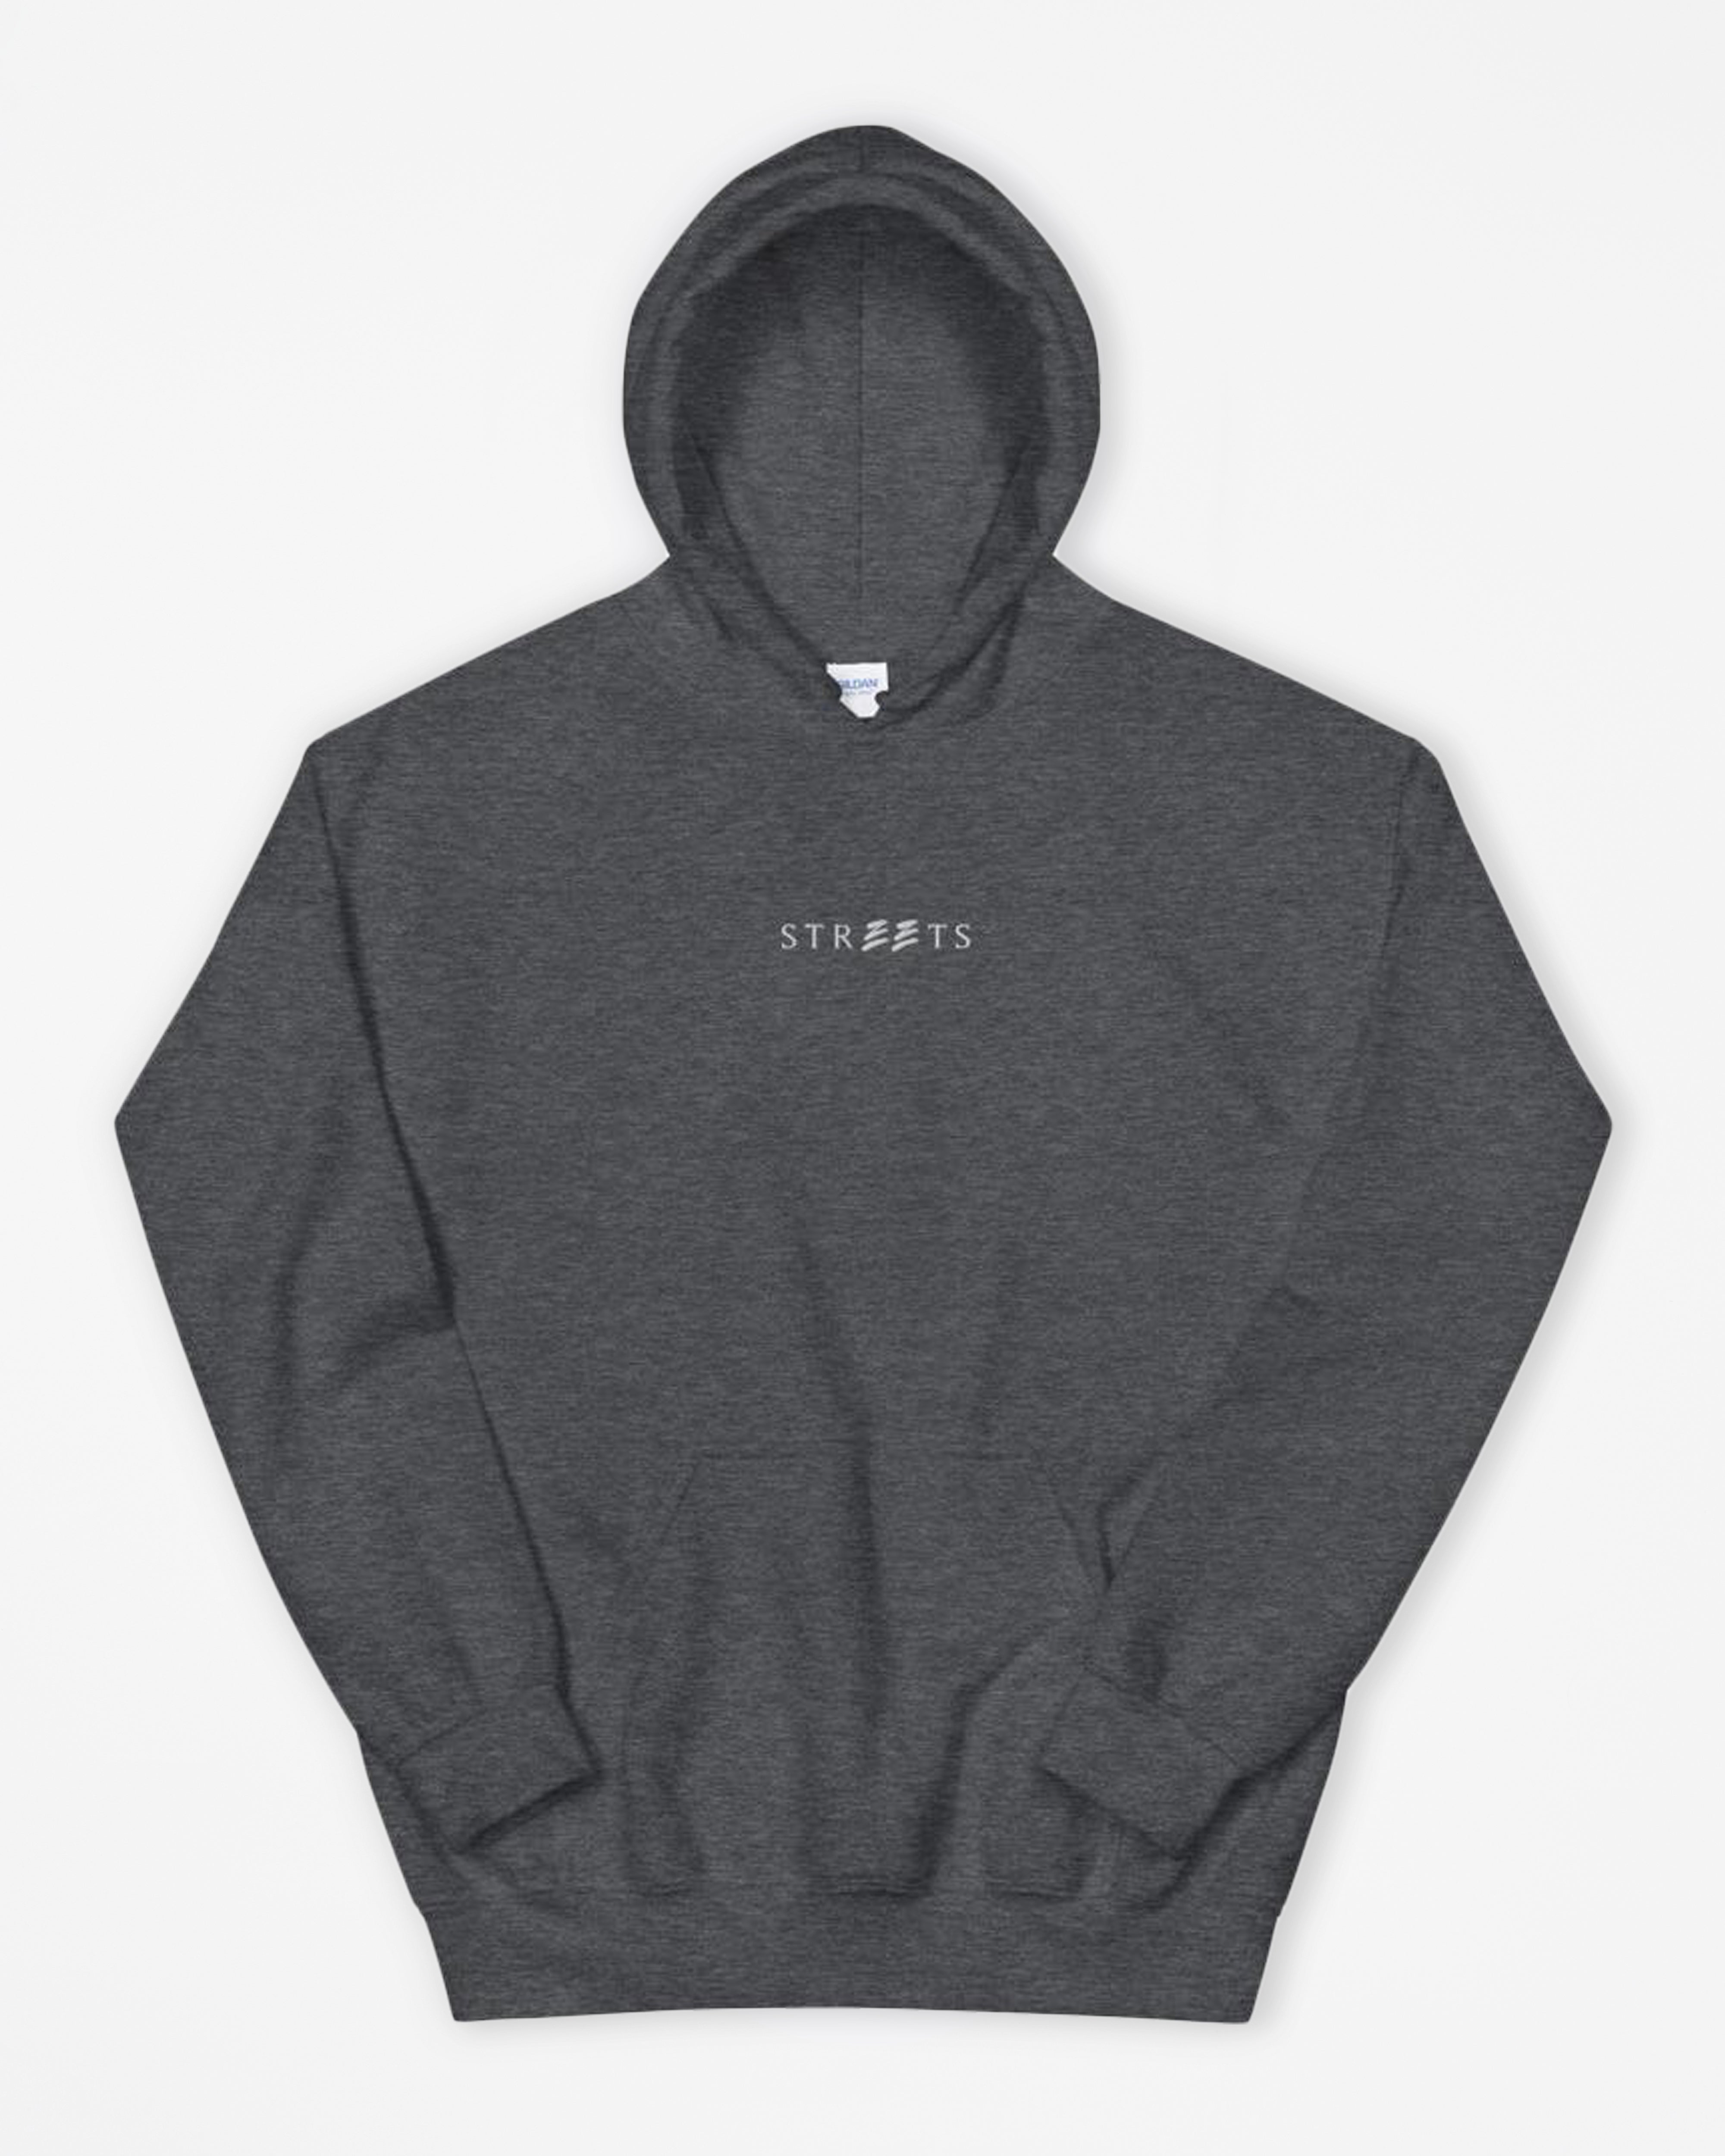 Streets - Hoodie with Streets Embroidery Logo Black